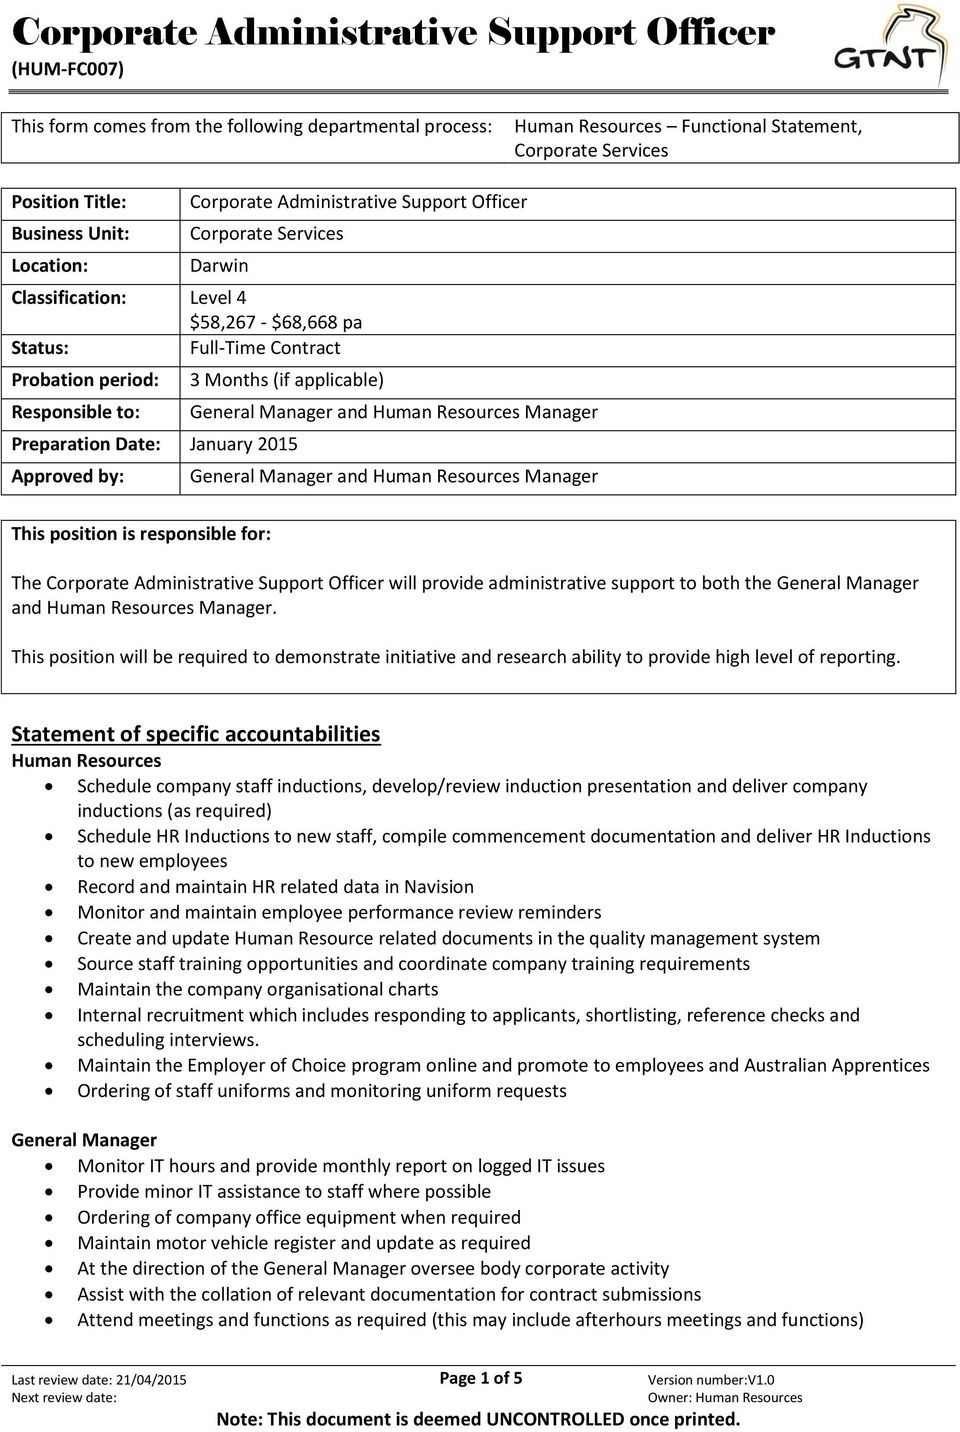 Manager Preparation Date: January 2015 Approved by: General Manager and Human Resources Manager This position is responsible for: The Corporate Administrative Support Officer will provide